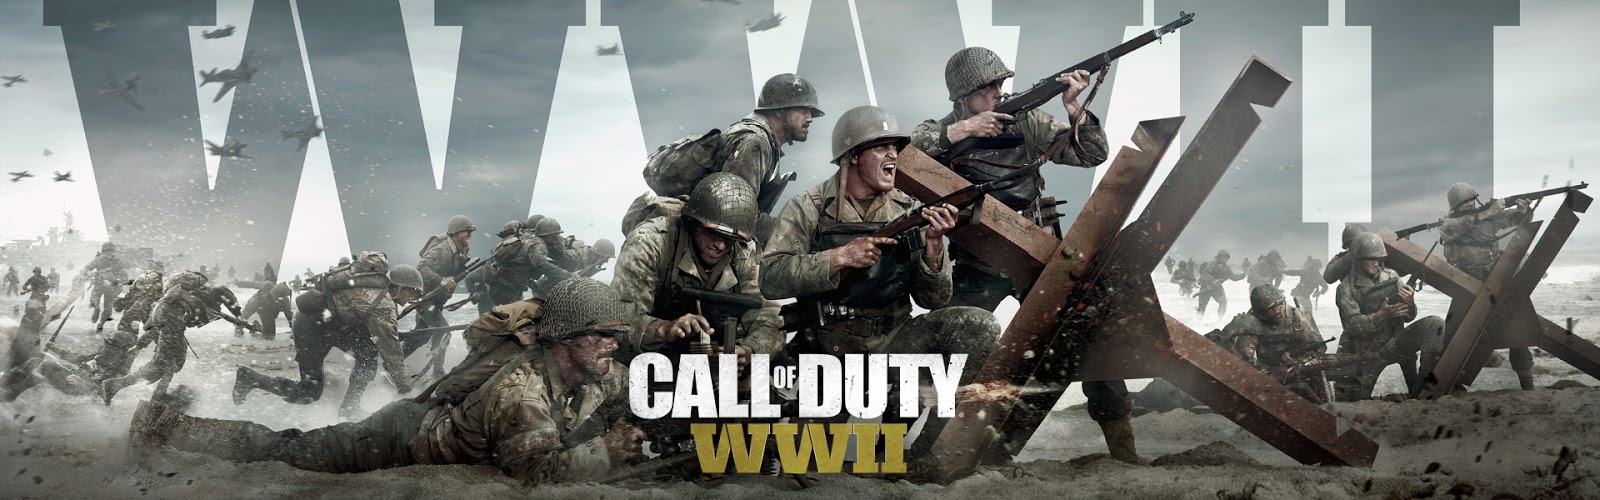 download wwii game xbox